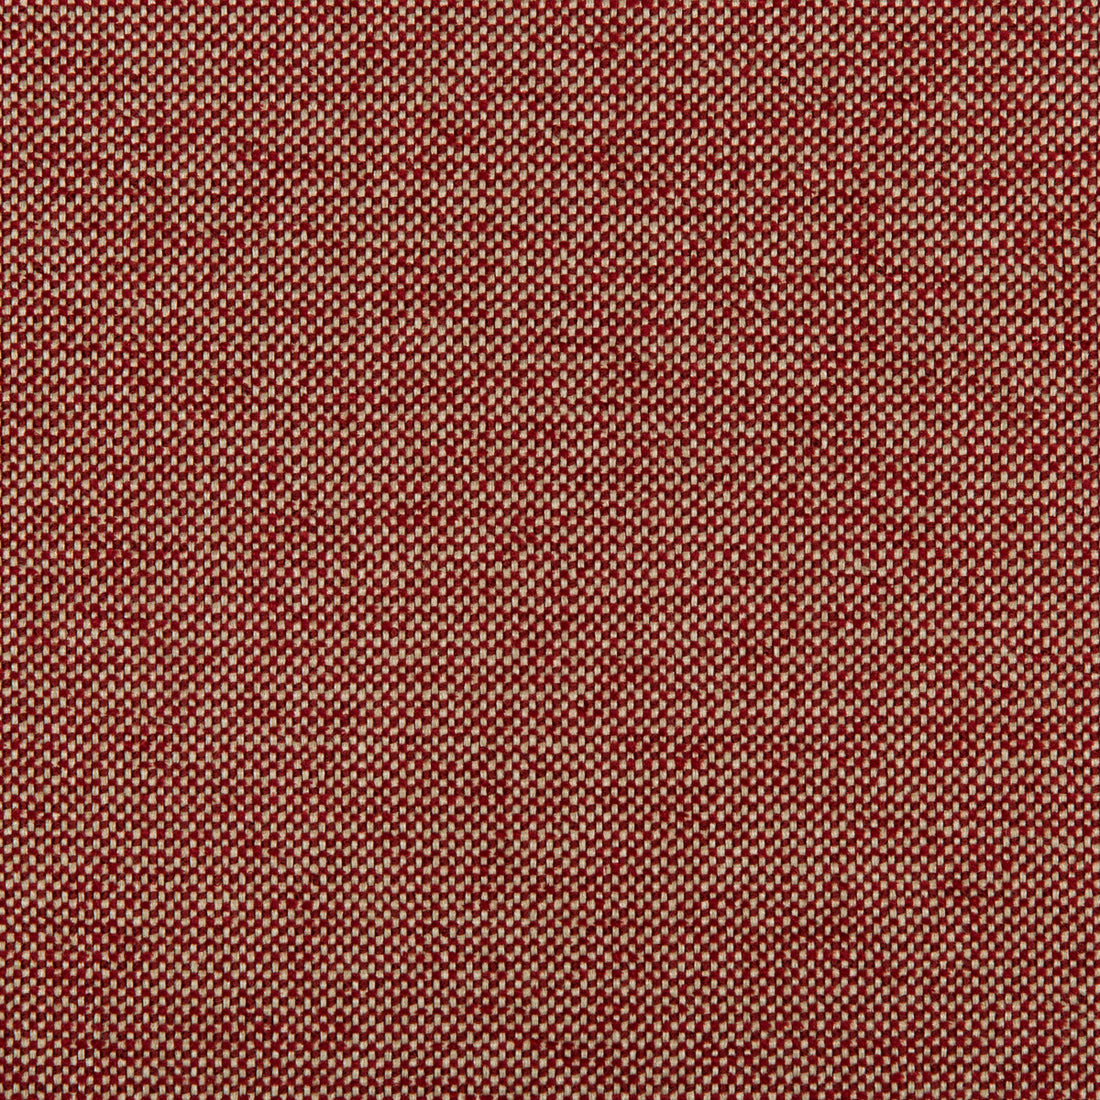 Burr fabric in cranberry color - pattern 35745.9.0 - by Kravet Contract in the Value Kravetarmor collection